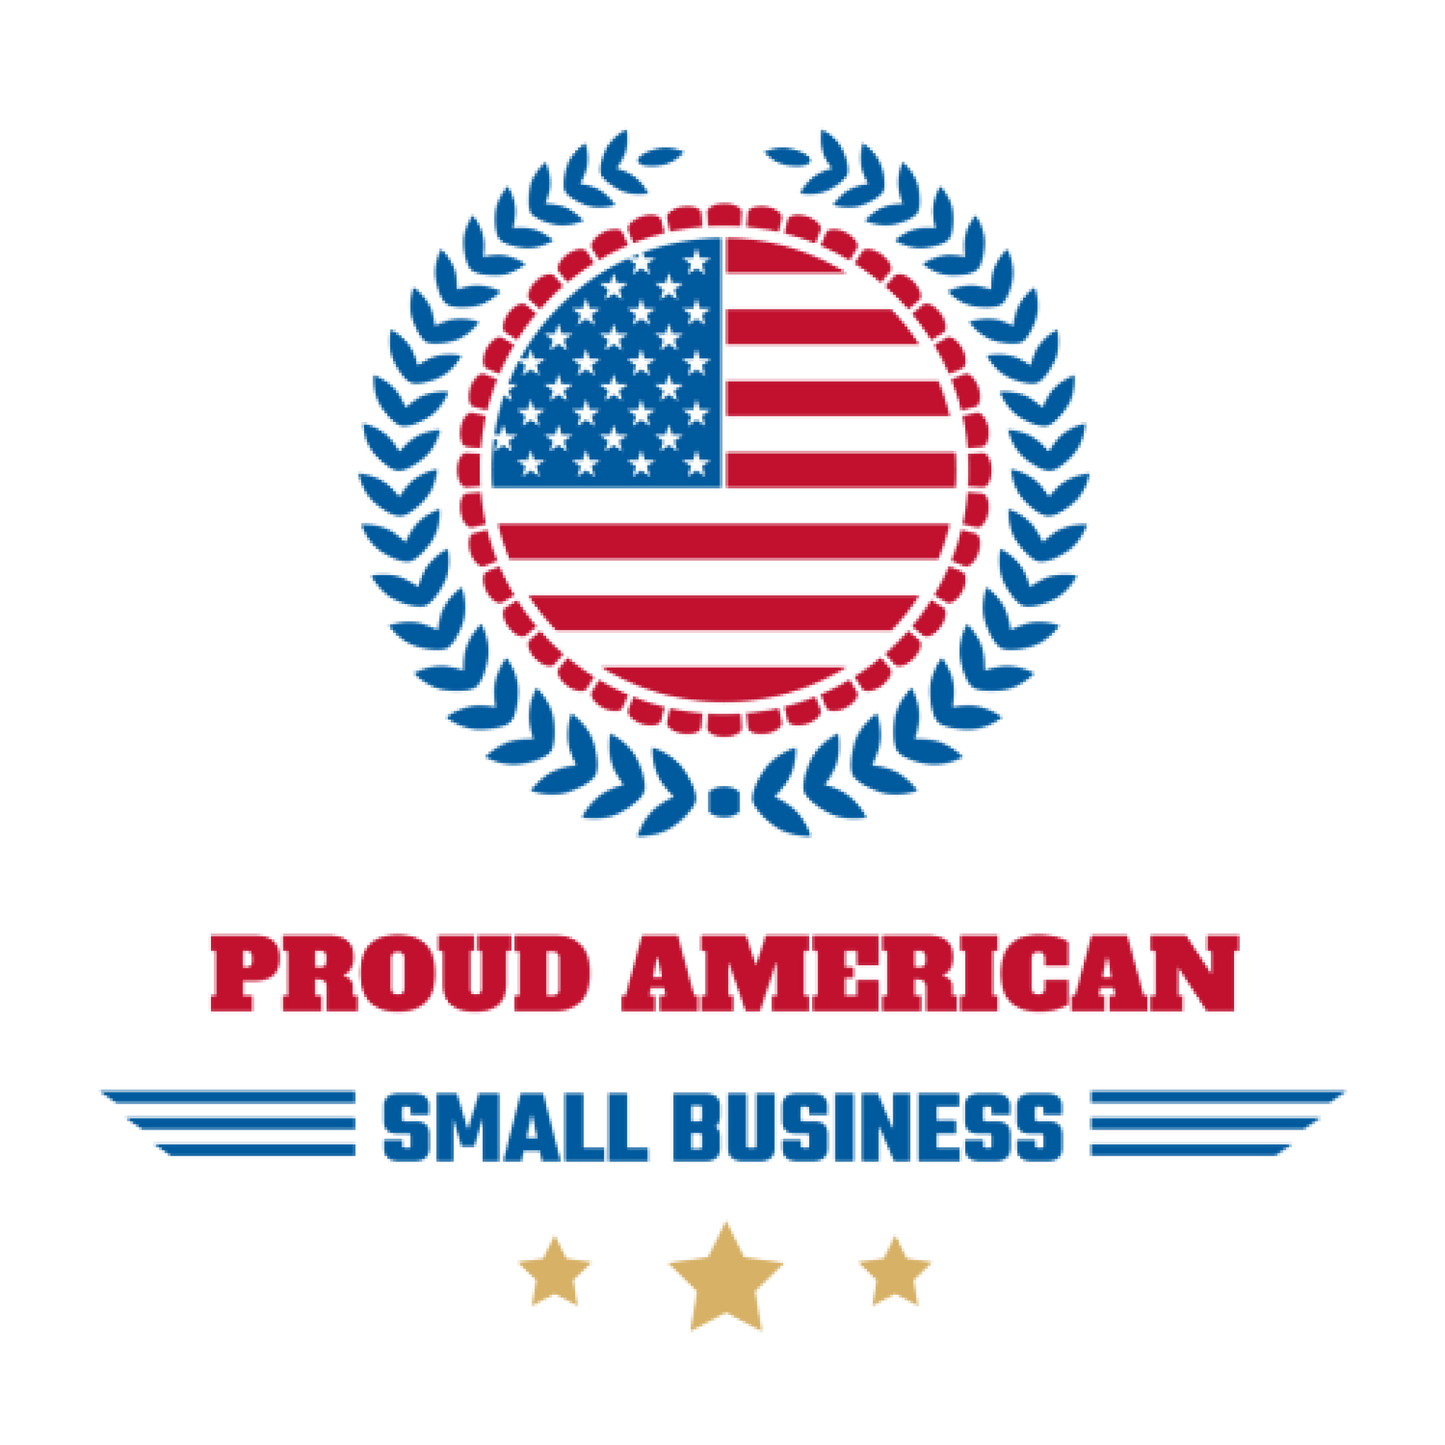 Proud American Small Business Logo of Asphalt Anarchist Clothing Co. HOT ROD KUSTOM KULTURE APPAREL & PRODUCTS